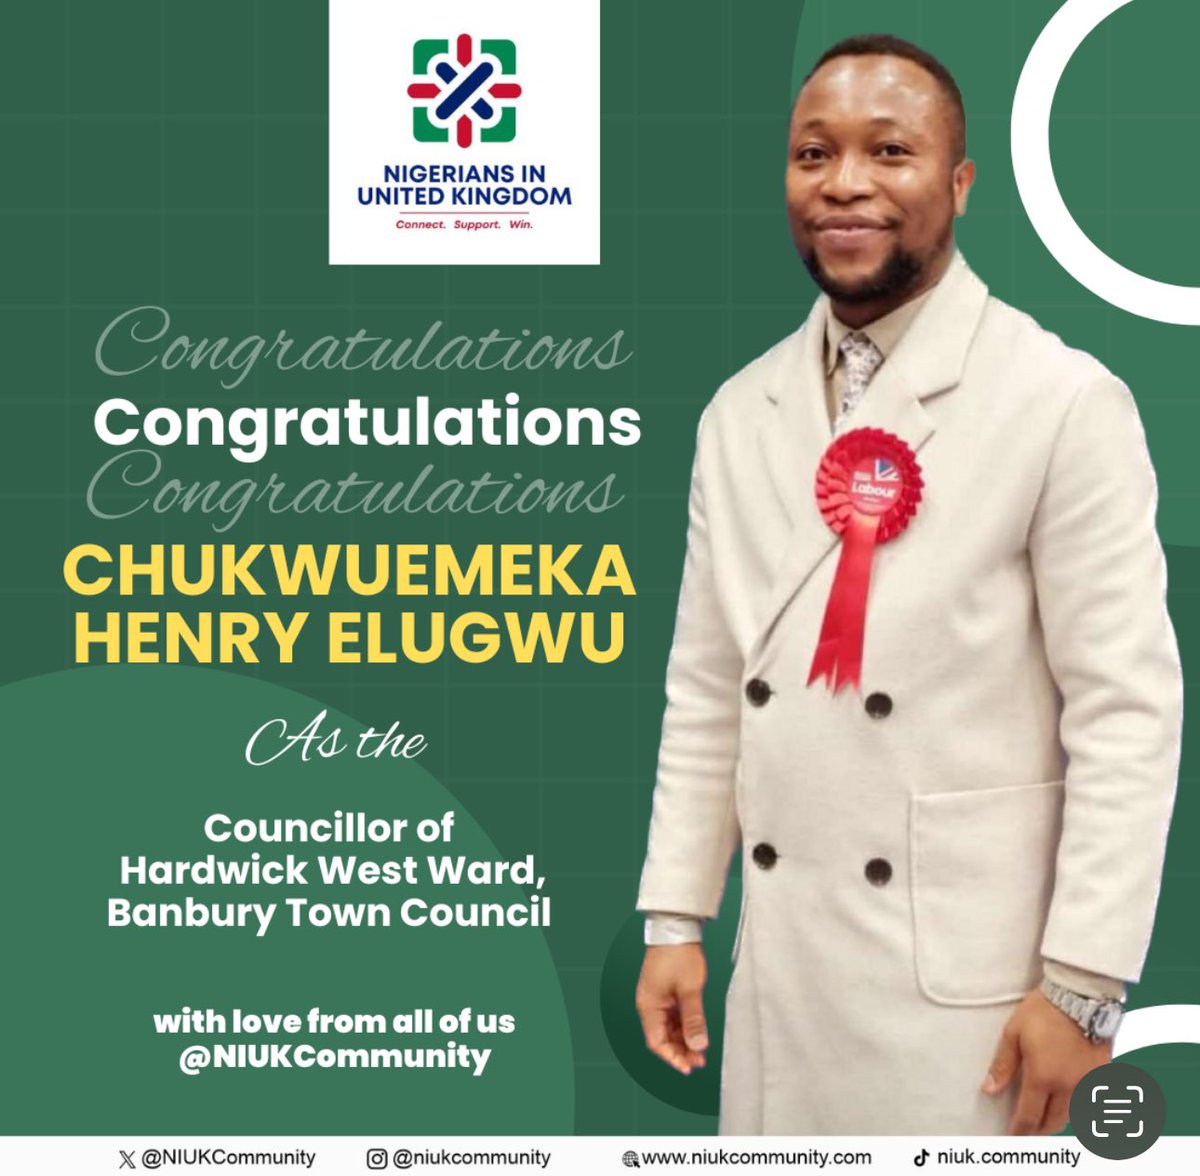 Congratulations to our brother, Chukwuemeka Henry Elugwu, on his victory as Councillor of Hardwick West Ward, Banbury Town Council.